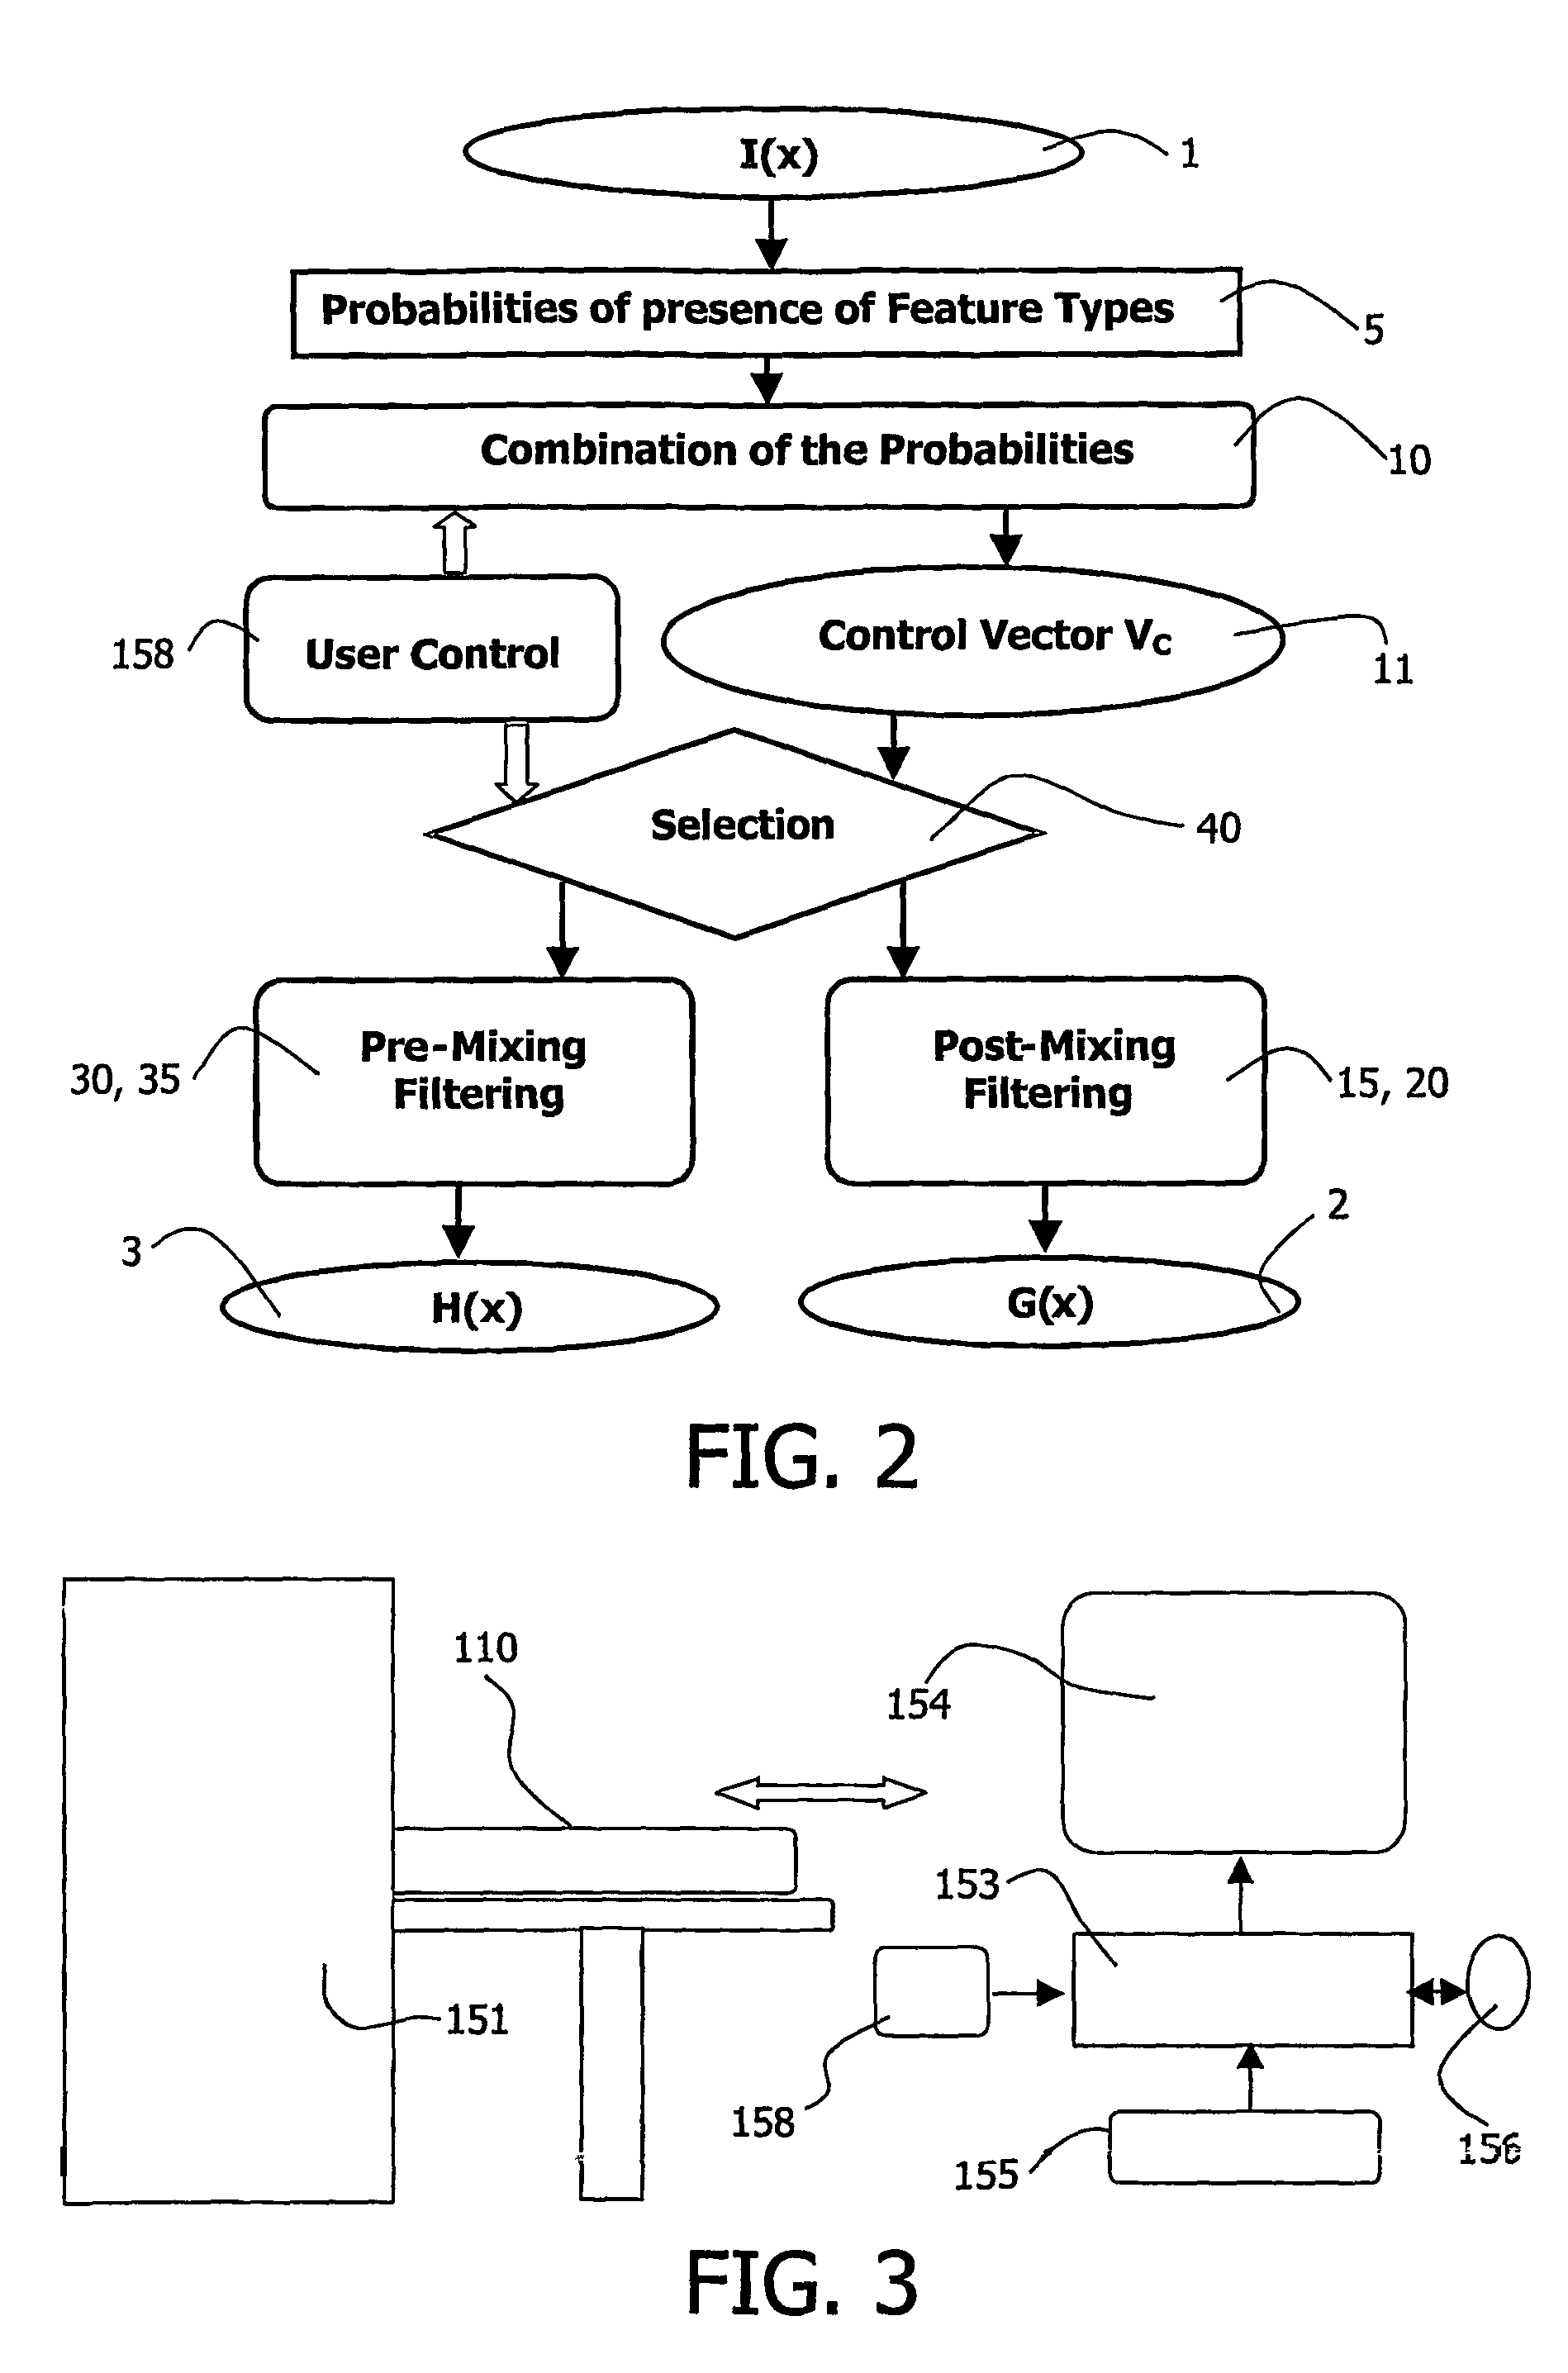 Image viewing system and method for generating filters for filtering image features according to their type